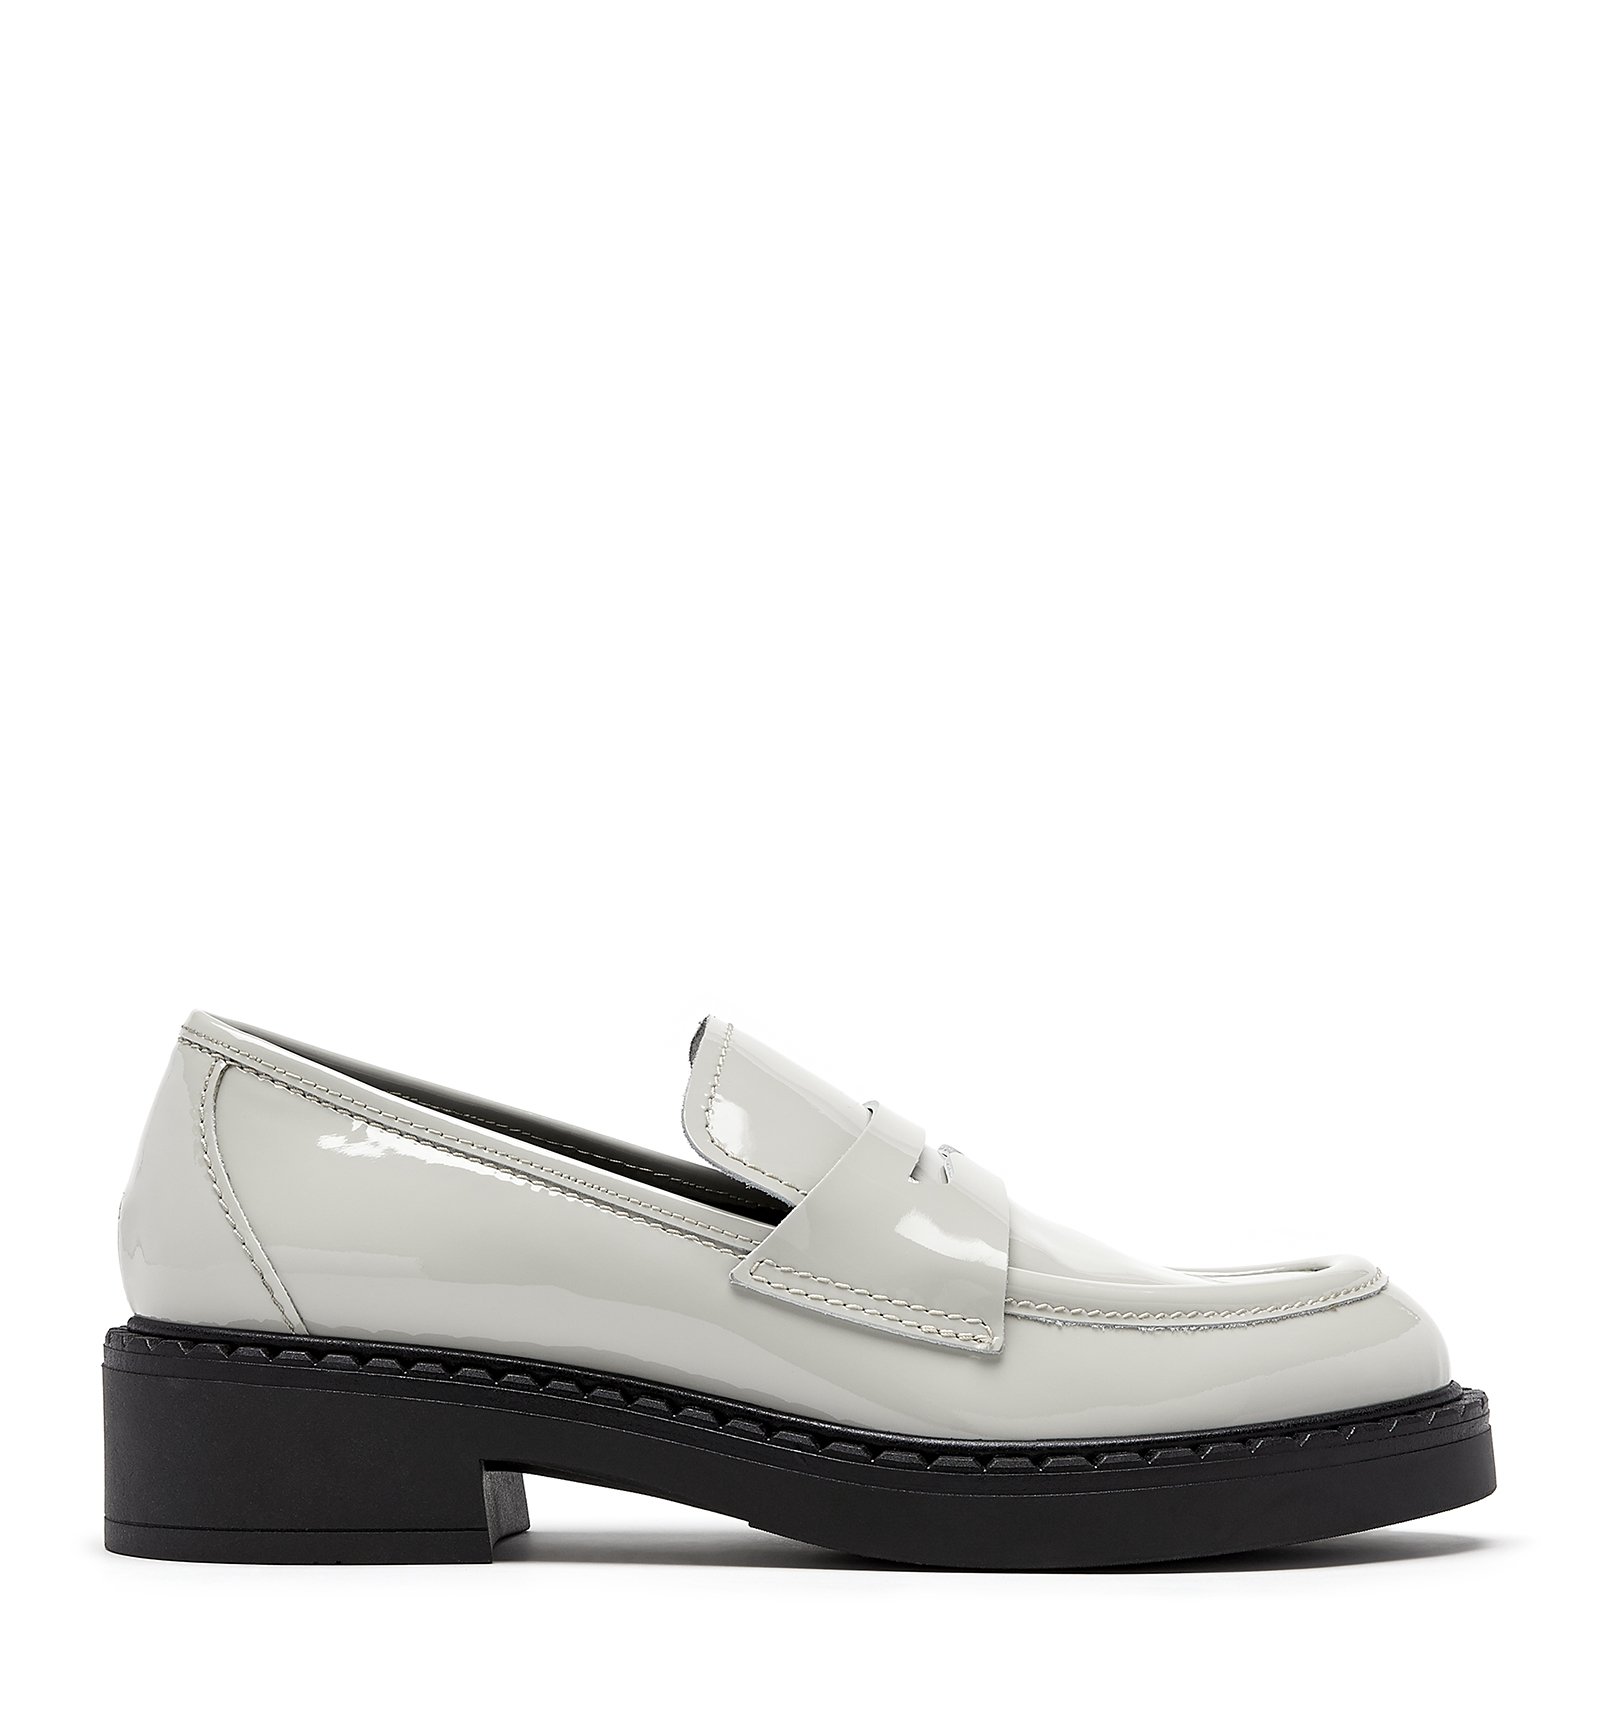 Loafers - Style - Shoes | La Canadienne International Boutique